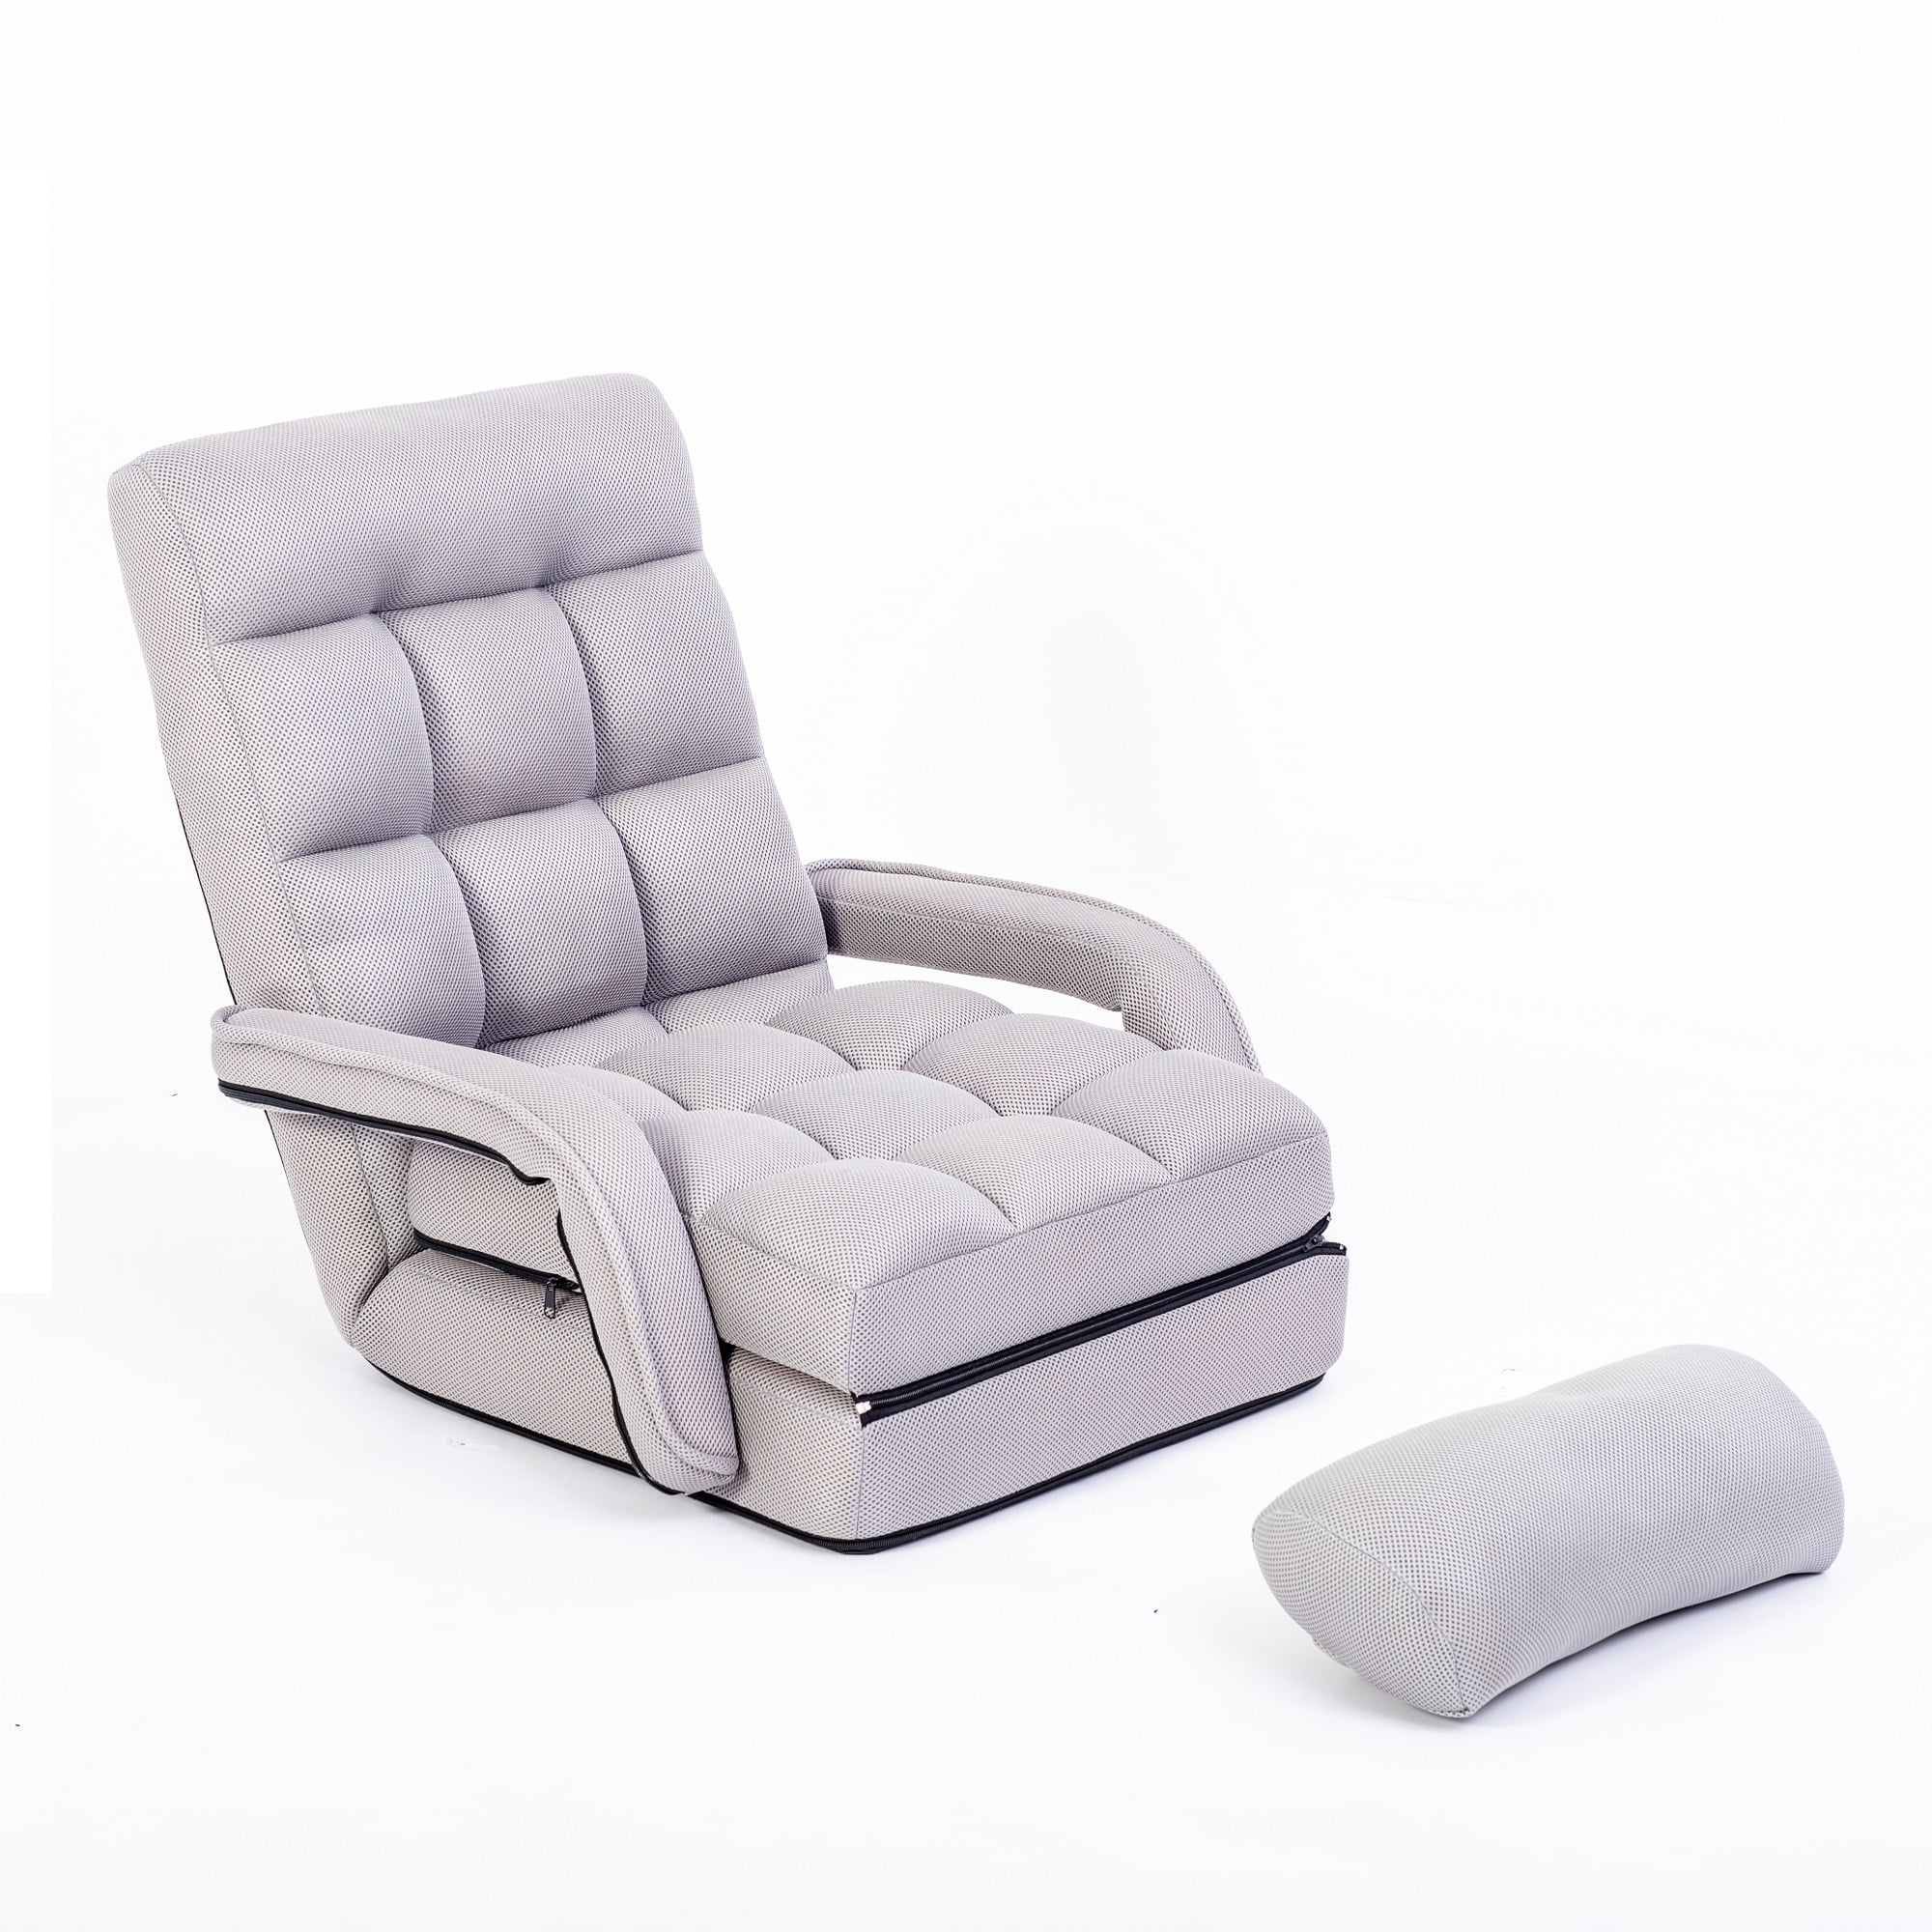 Folding Floor Single Sofa Game Chair with a Pillow 5 Adjustable Backrest Position Leisure Lounge Couch Gray